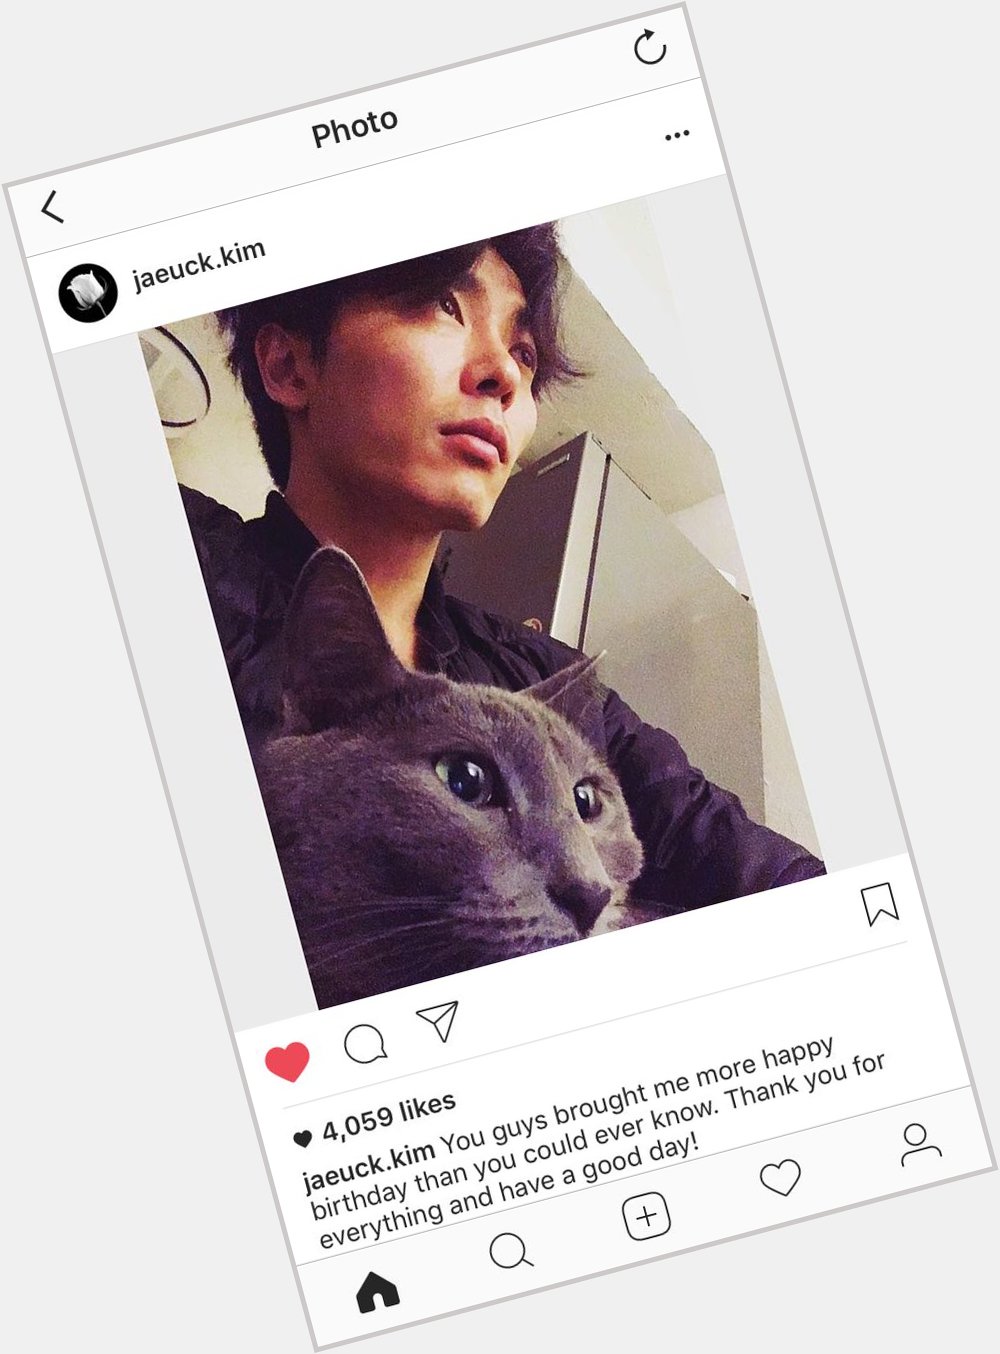 Aww finally a post on his birthday. Happy Birthday Kim Jae Wook. Lmao he is such a cat man. 